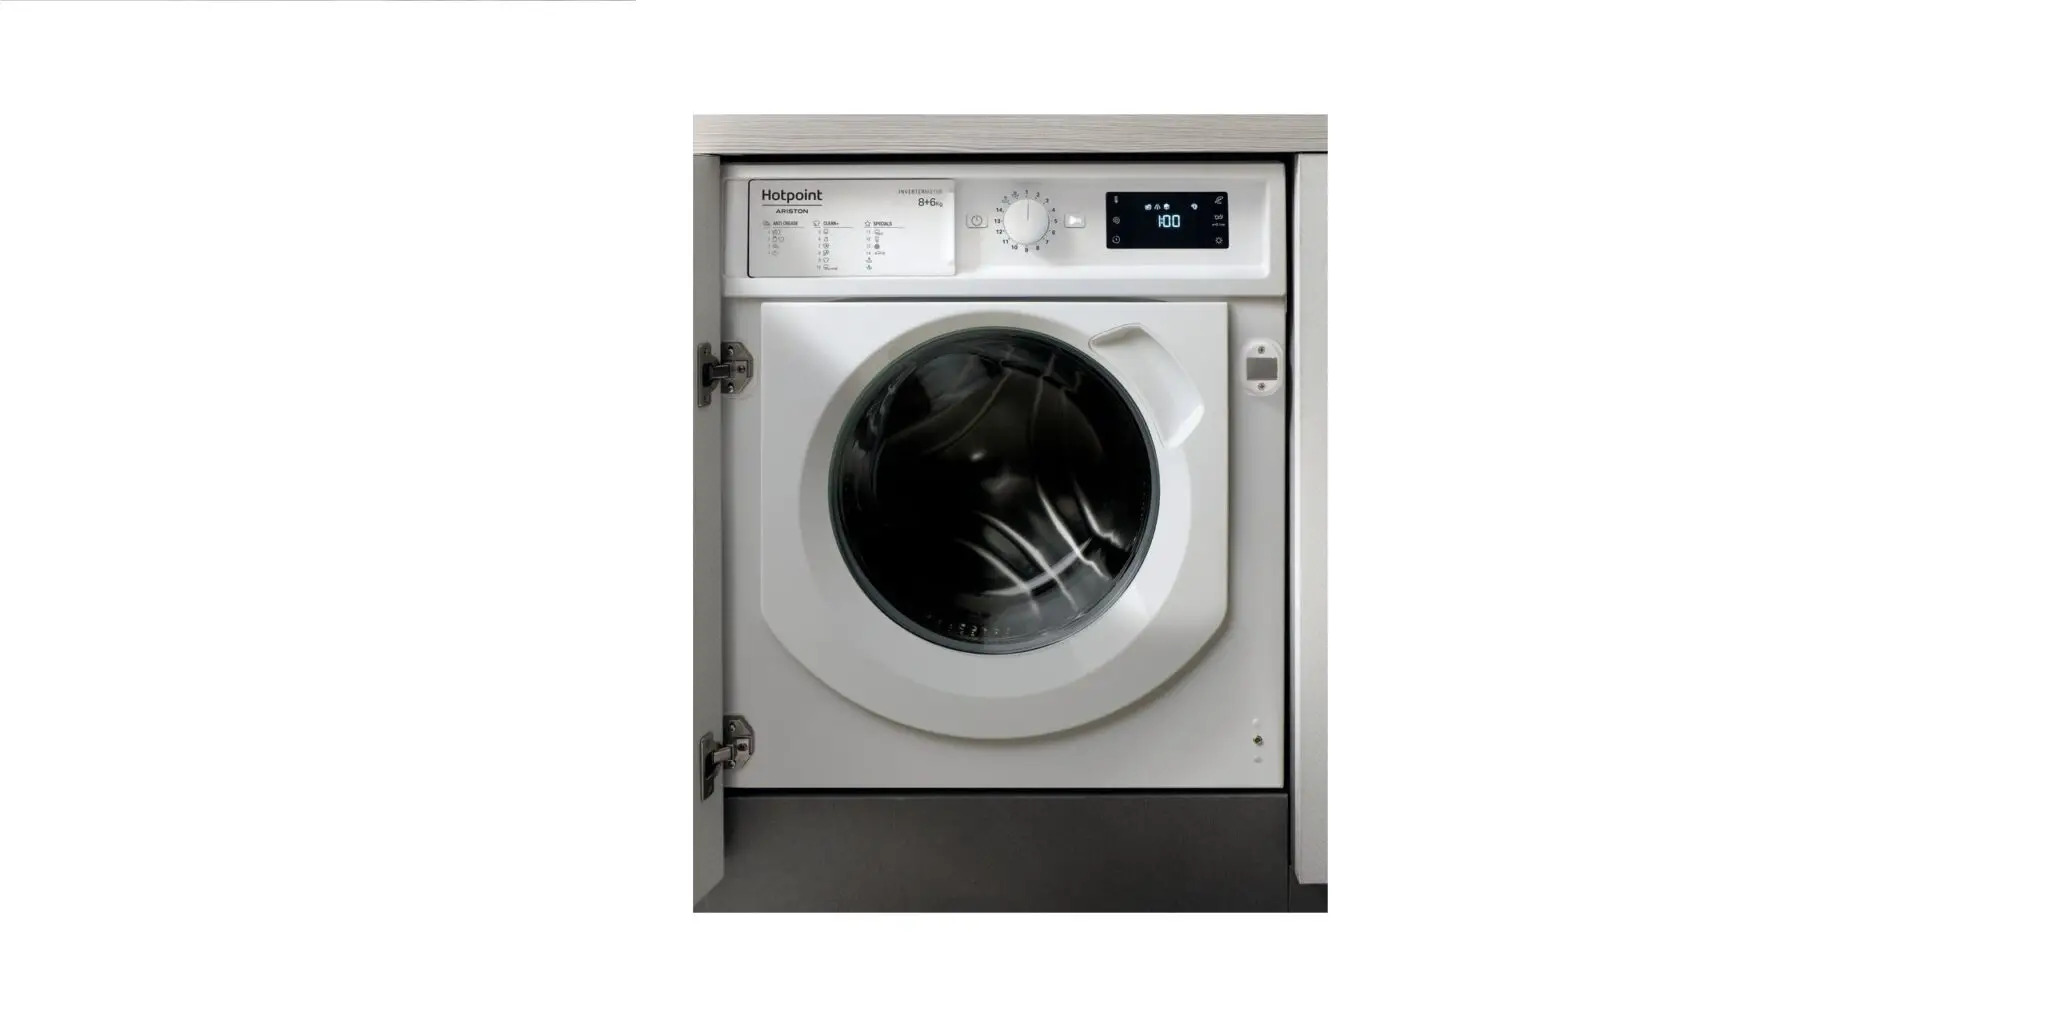 HG 861484 Fully Integrated Hotpoint Washer Dryer